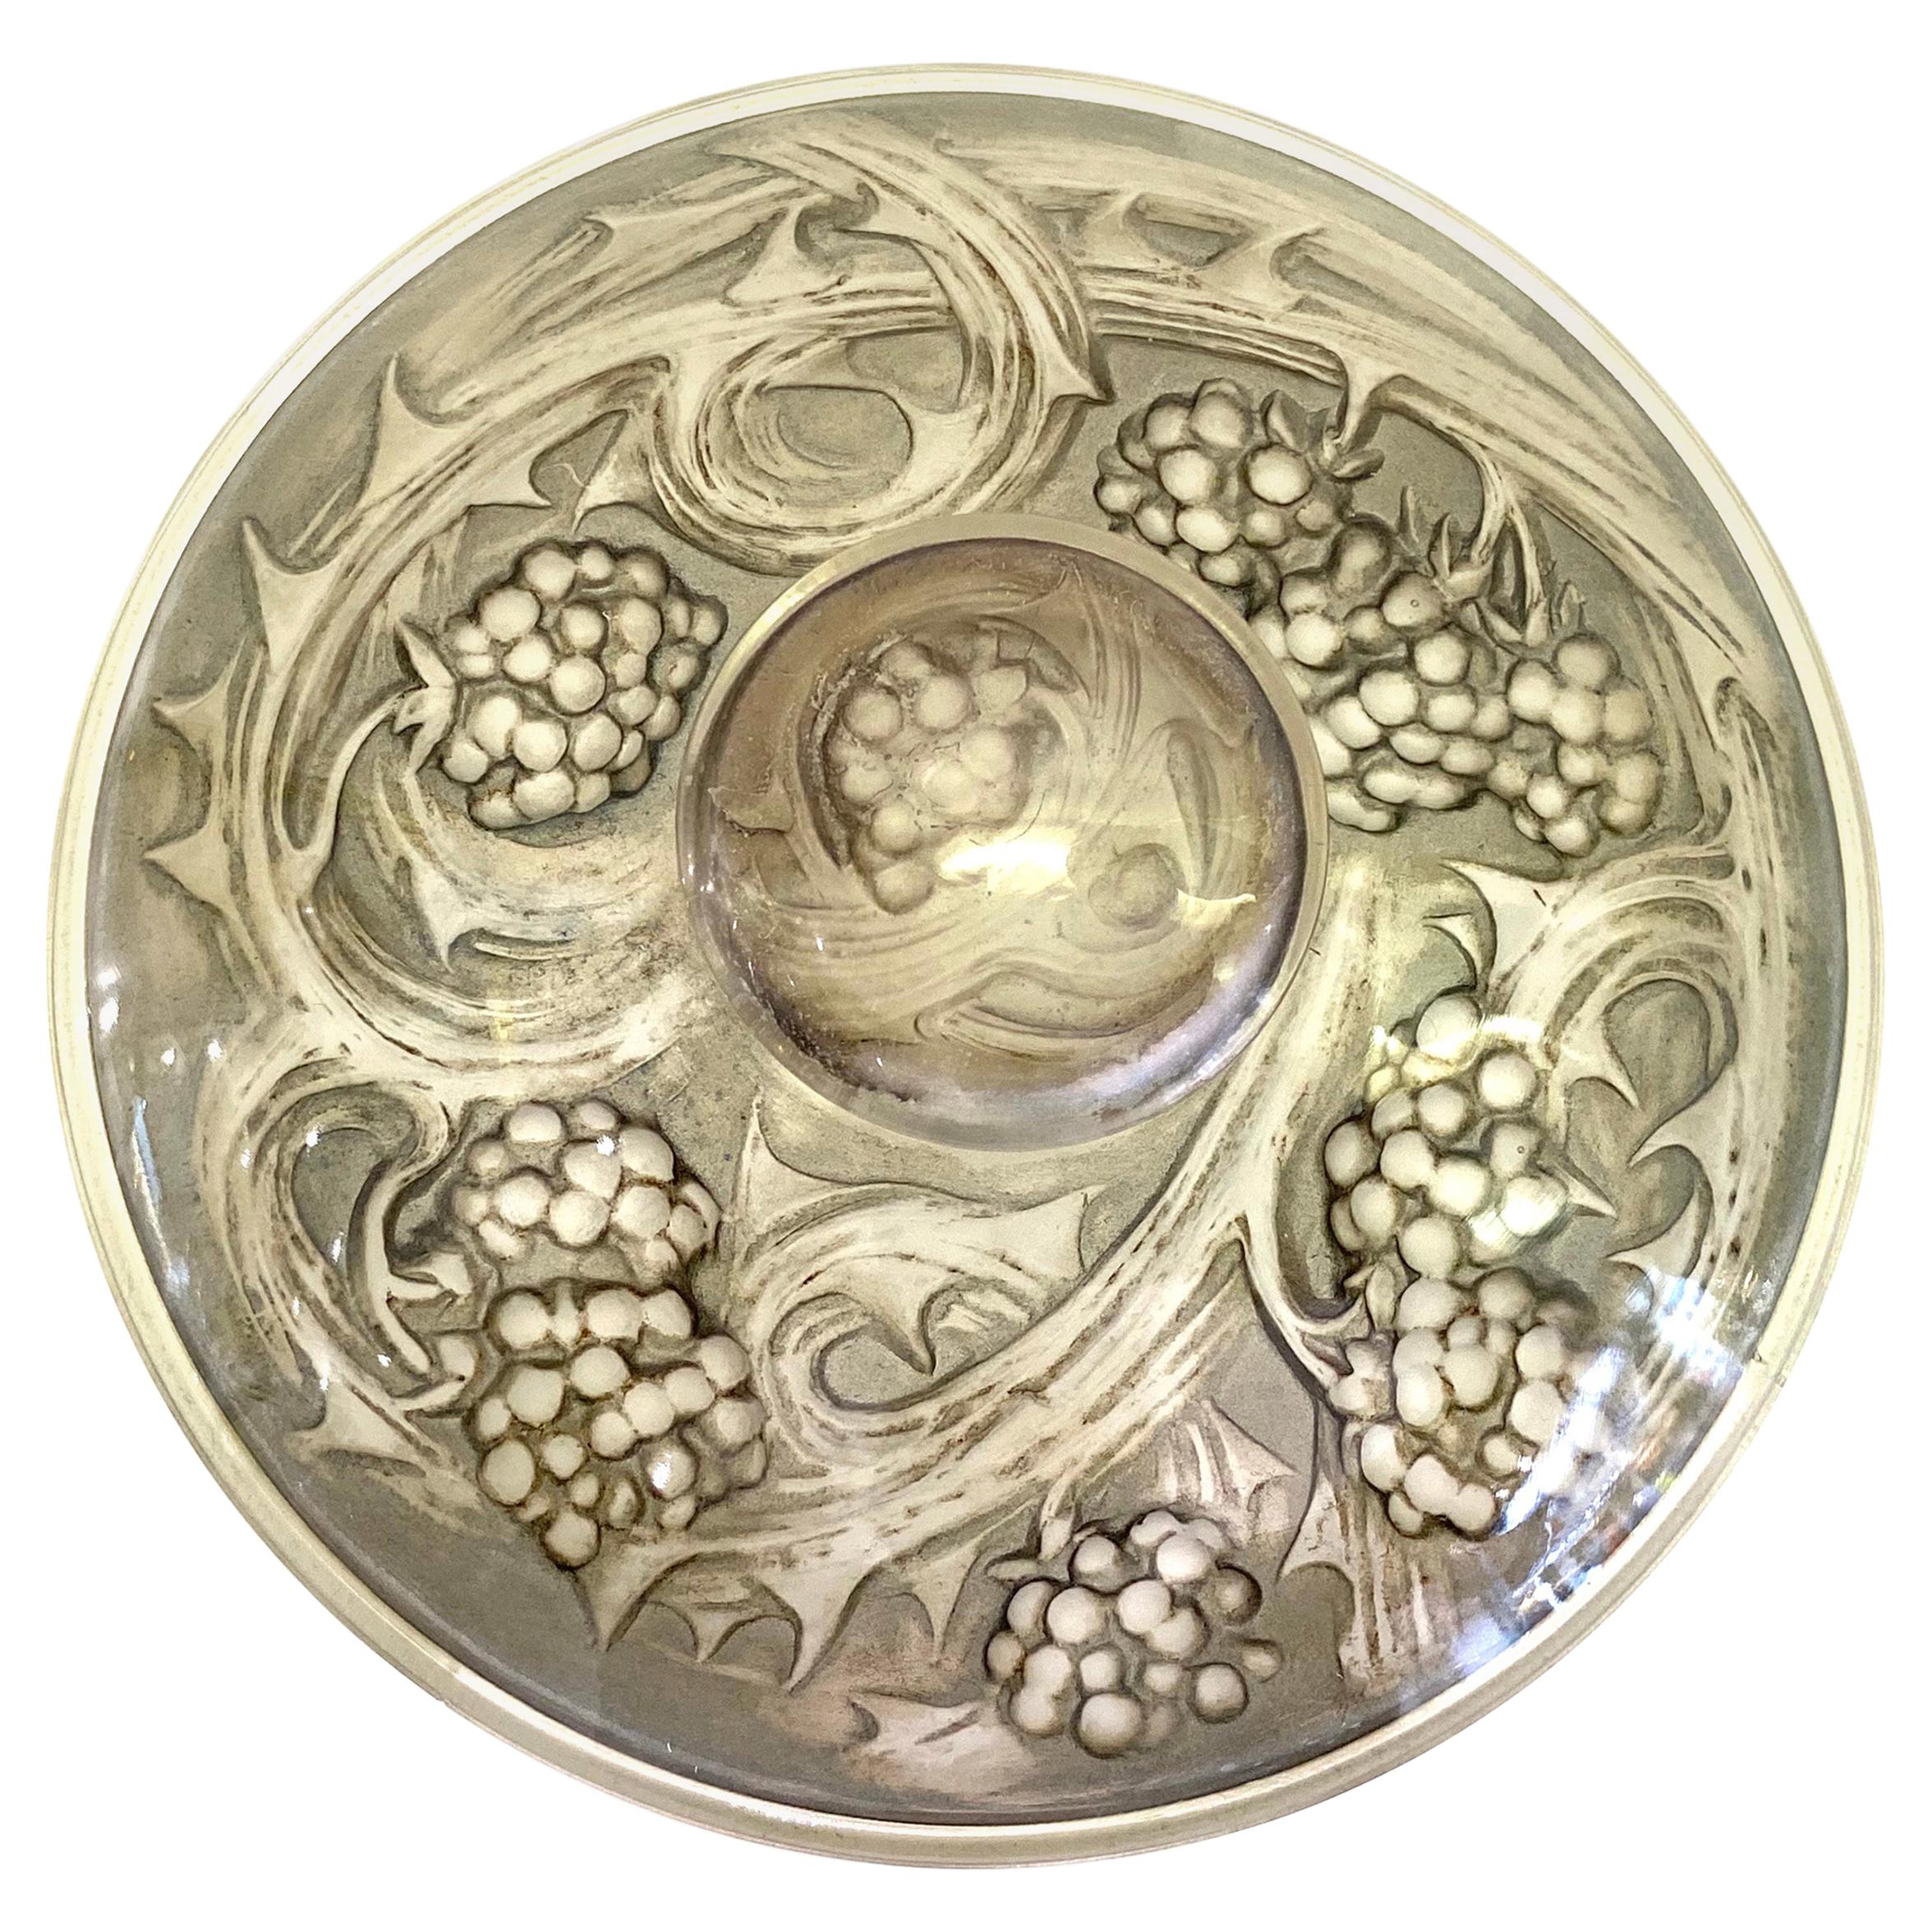 1920 Rene Lalique Mures Inkwell Grey Stained Glass, Blueberries